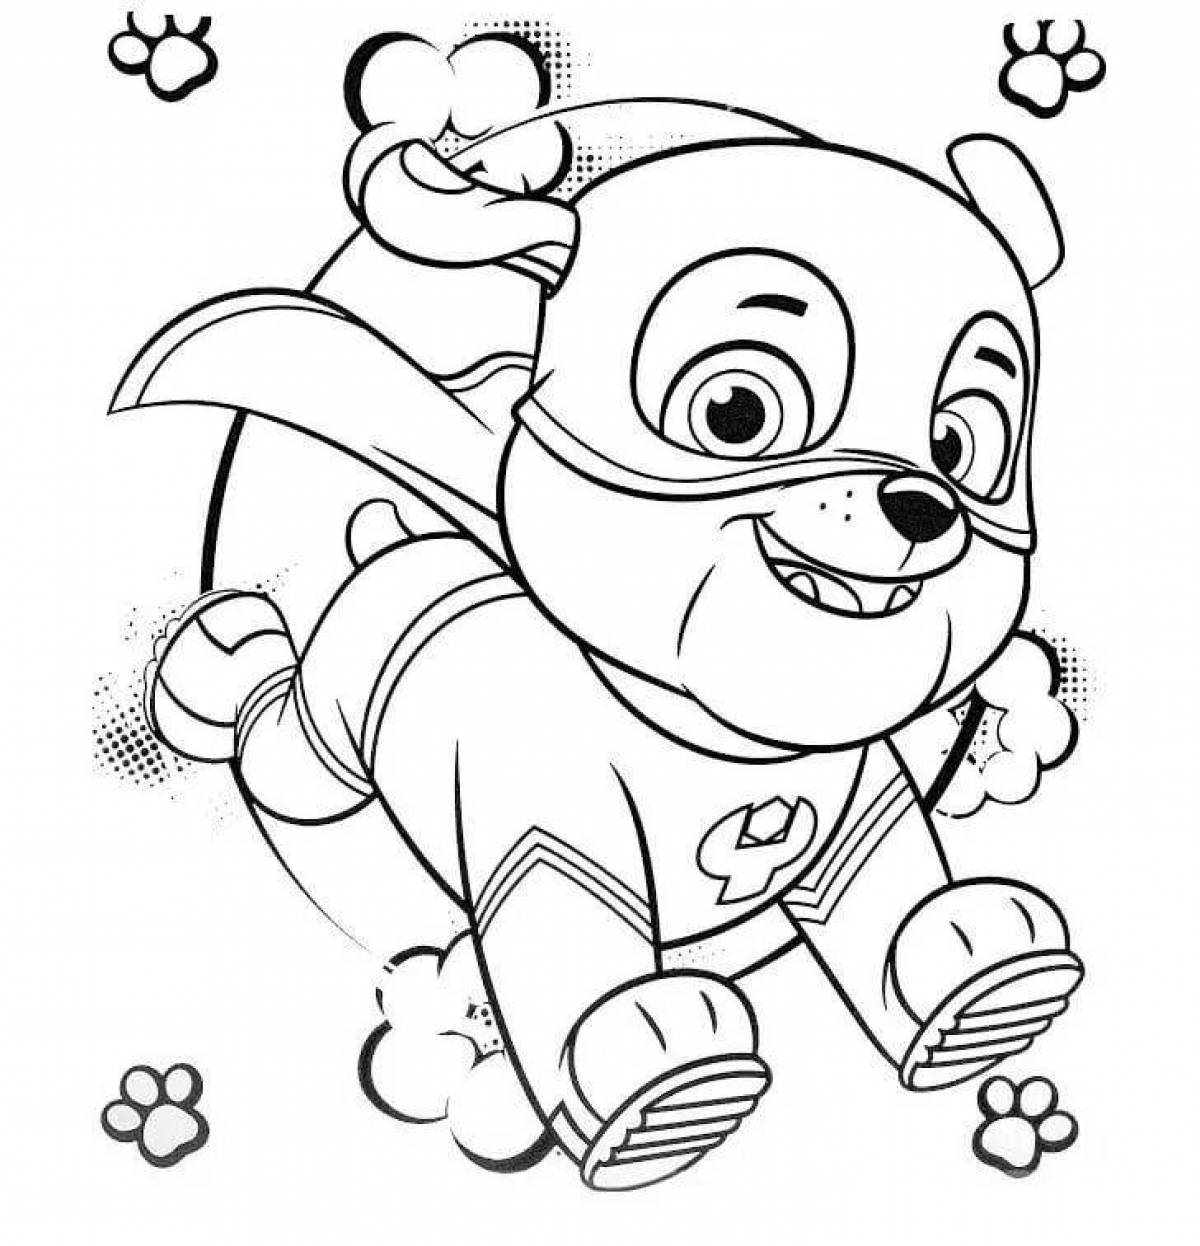 Animated paw patrol coloring page